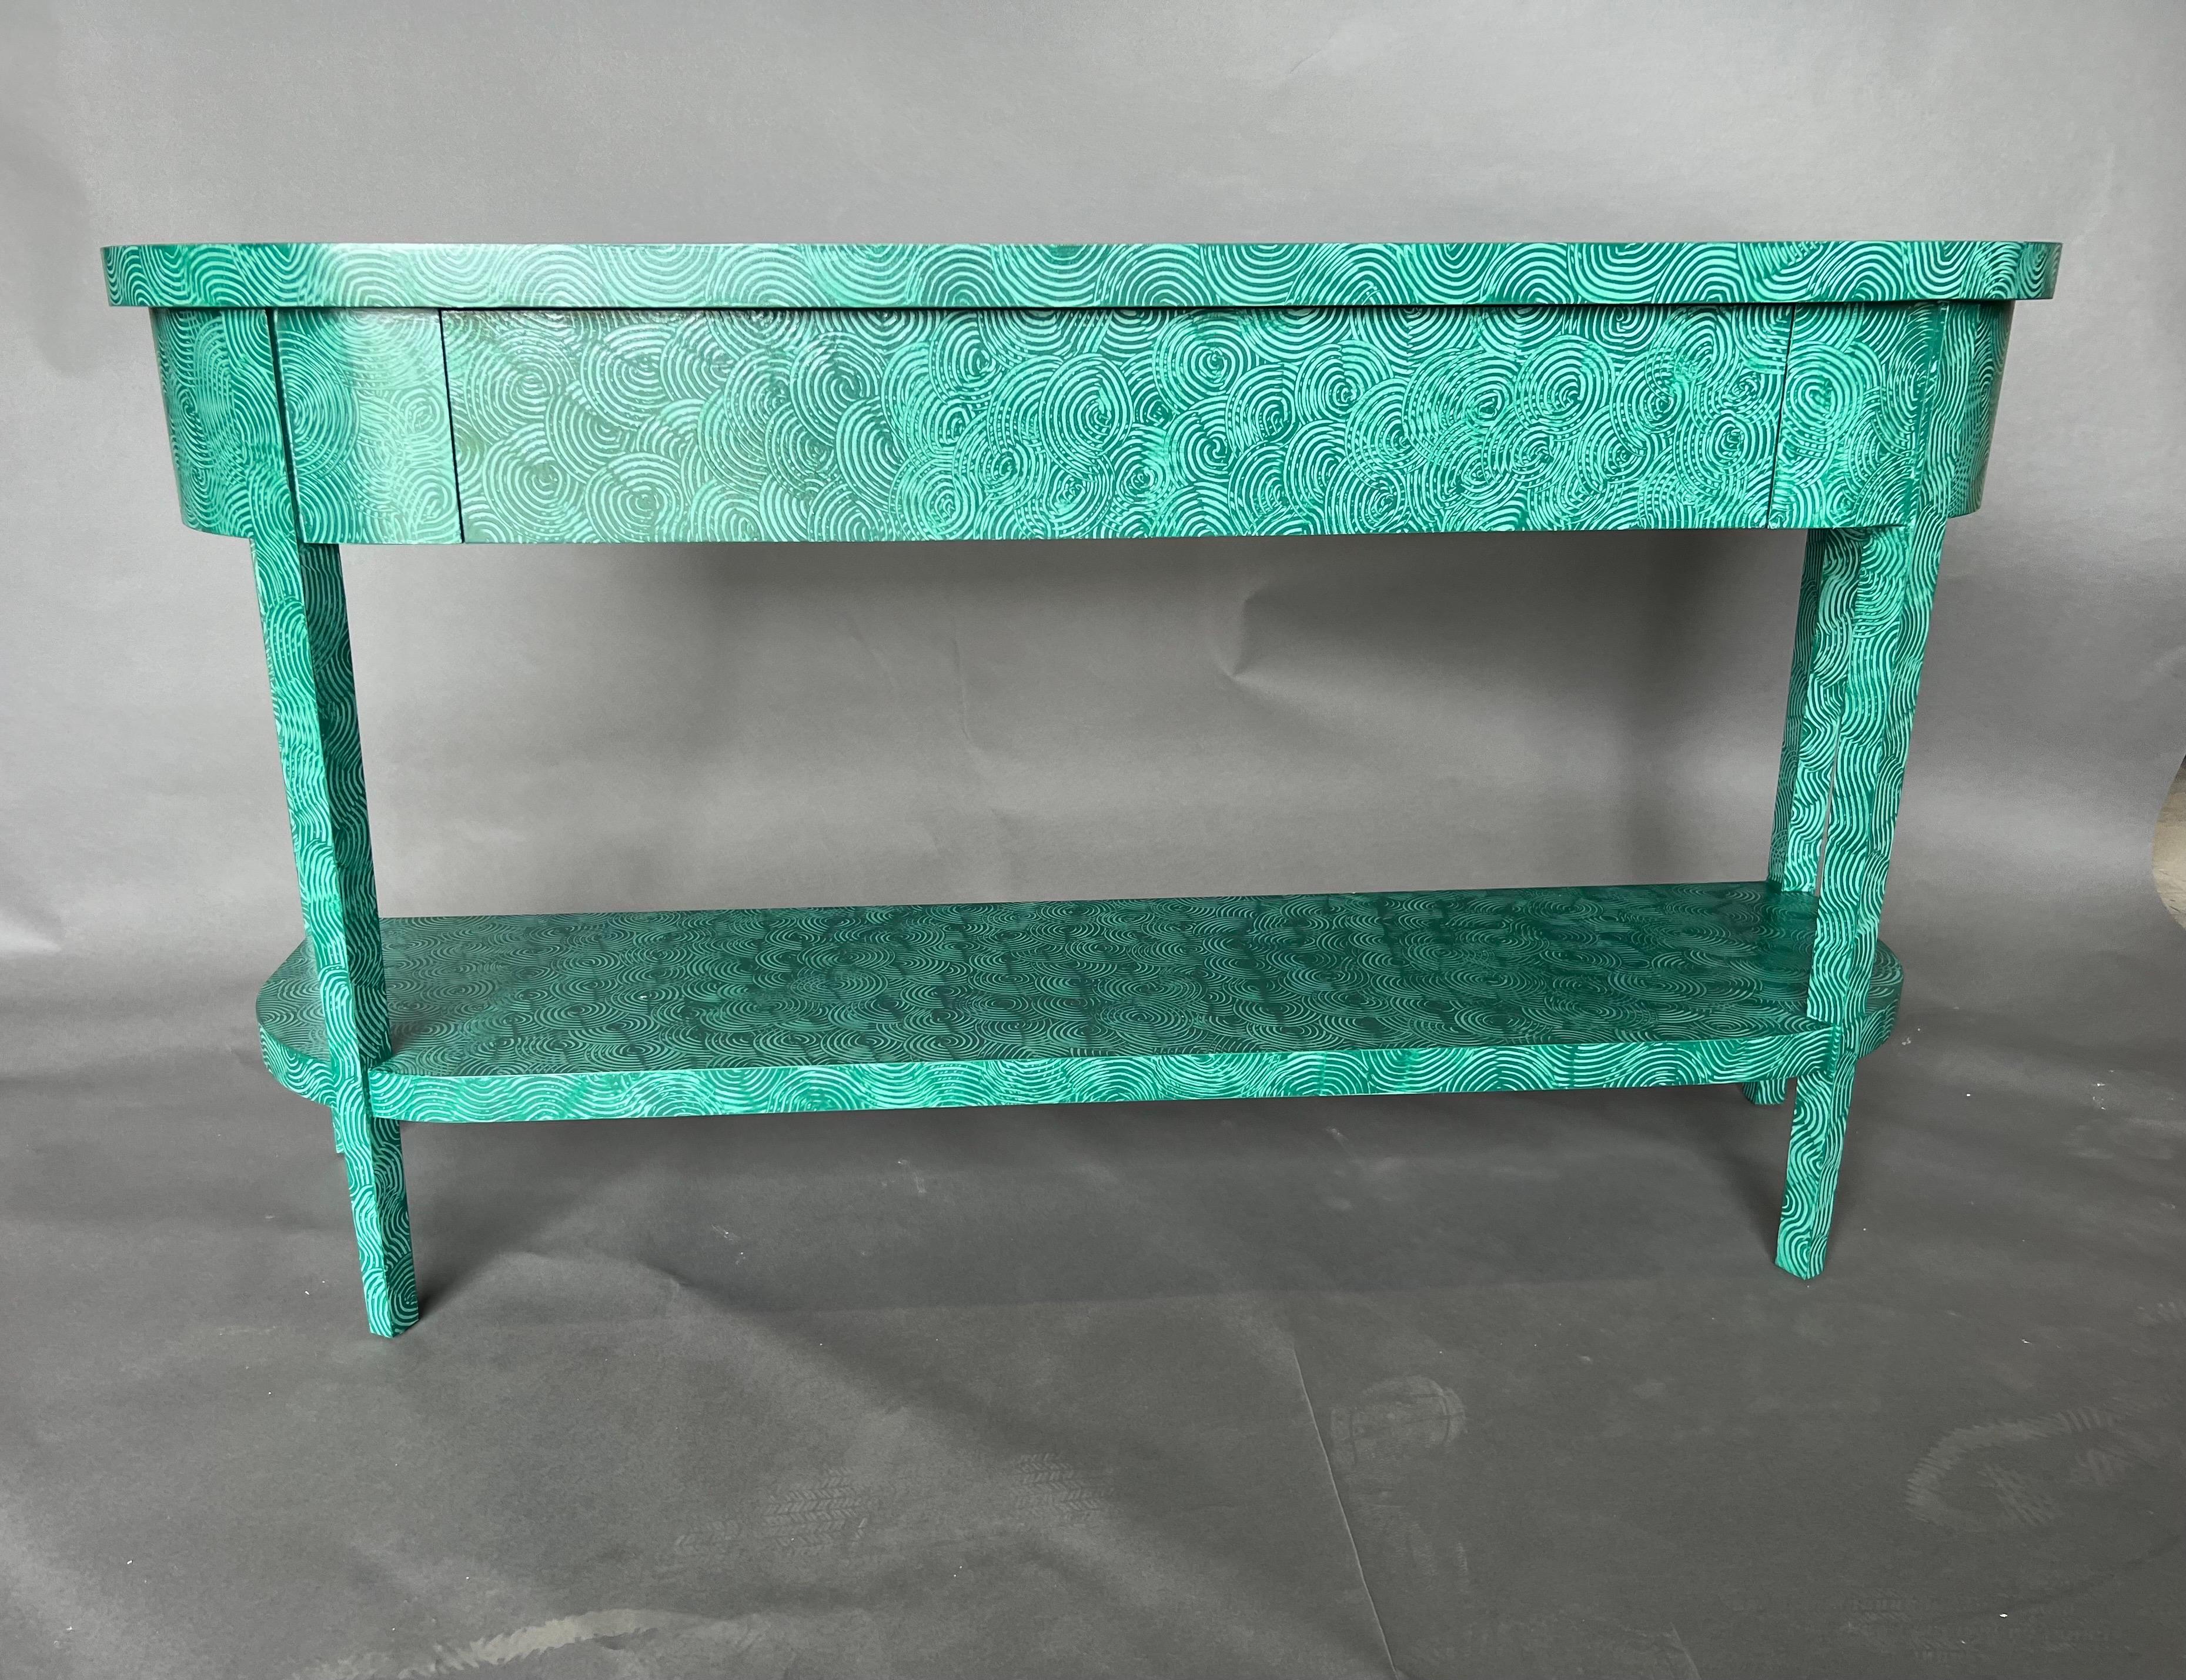 Custom Lizzie Console with Shelf and drawer in absolute green swirl by The Fabulous Things. All of our pieces are made to order and hand painted in Richmond, VA. Current lead times approximately 4-6 weeks. Custom sizes and finishes available. Please